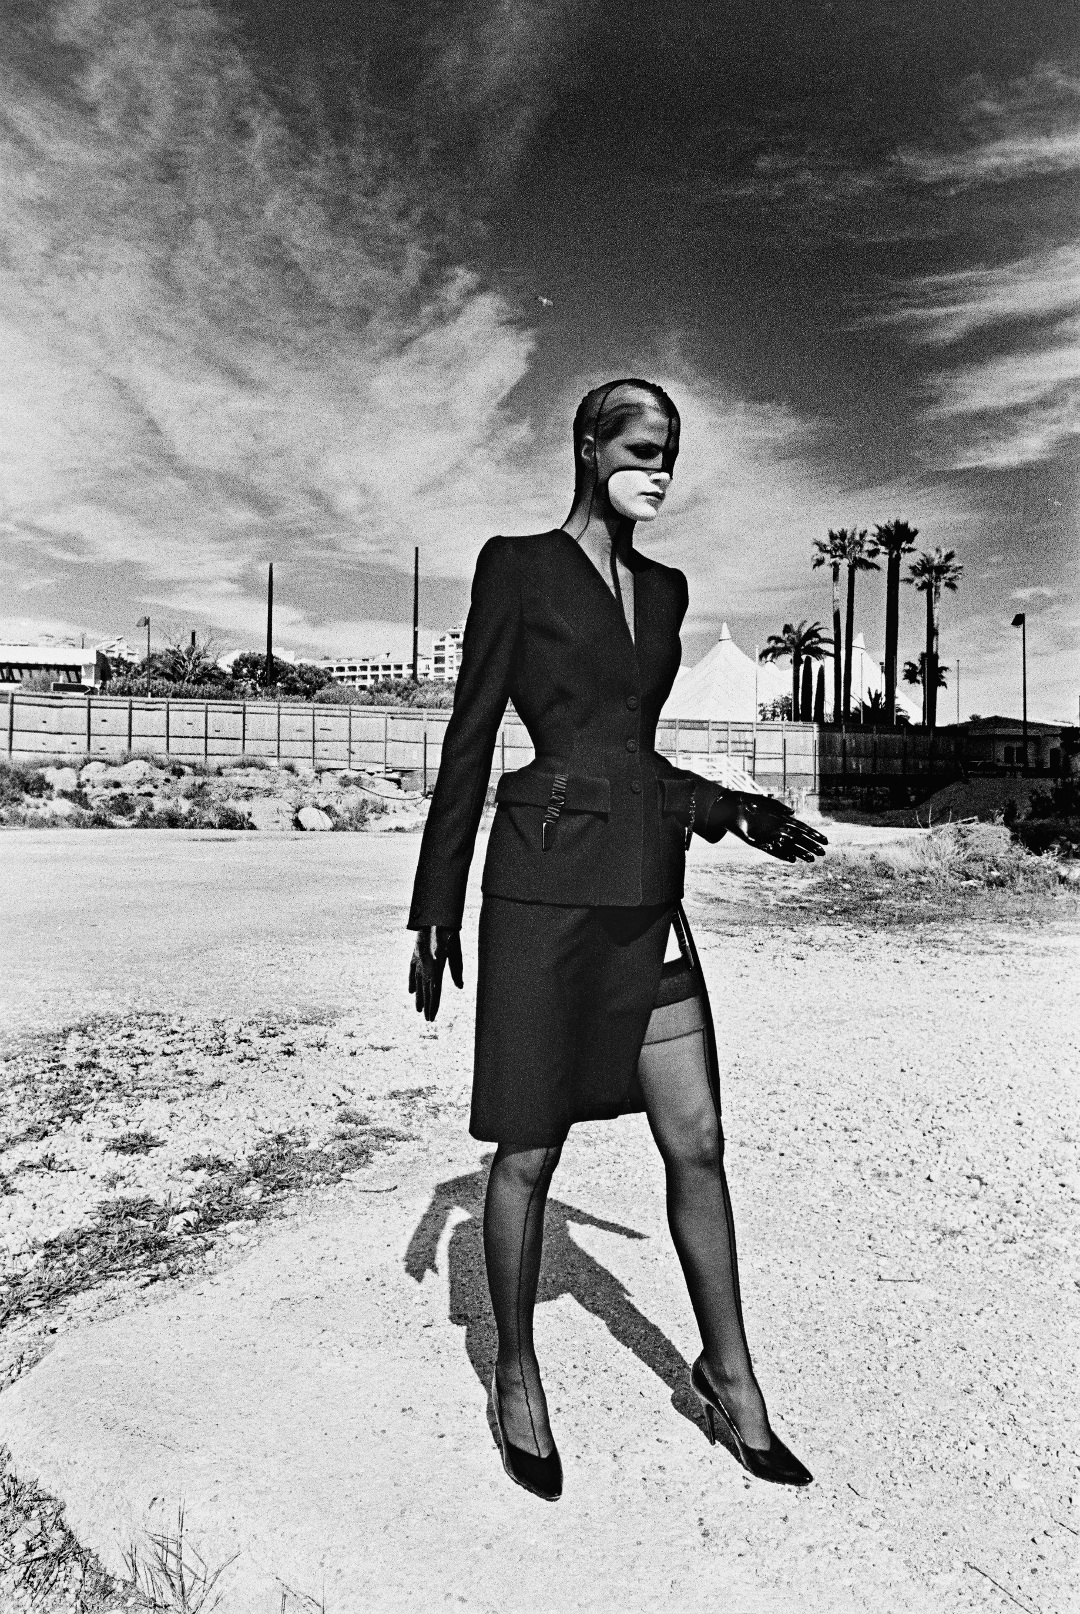 Helmut Newton, photo shoot for the catalogue of the collection Lingerie Revisited, Monaco, 1998. Photo: © The Helmut Newton Estate. Outfit: Thierry Mugler, Lingerie Revisited collection, prêt-à- porter fall/winter 1998–1999.